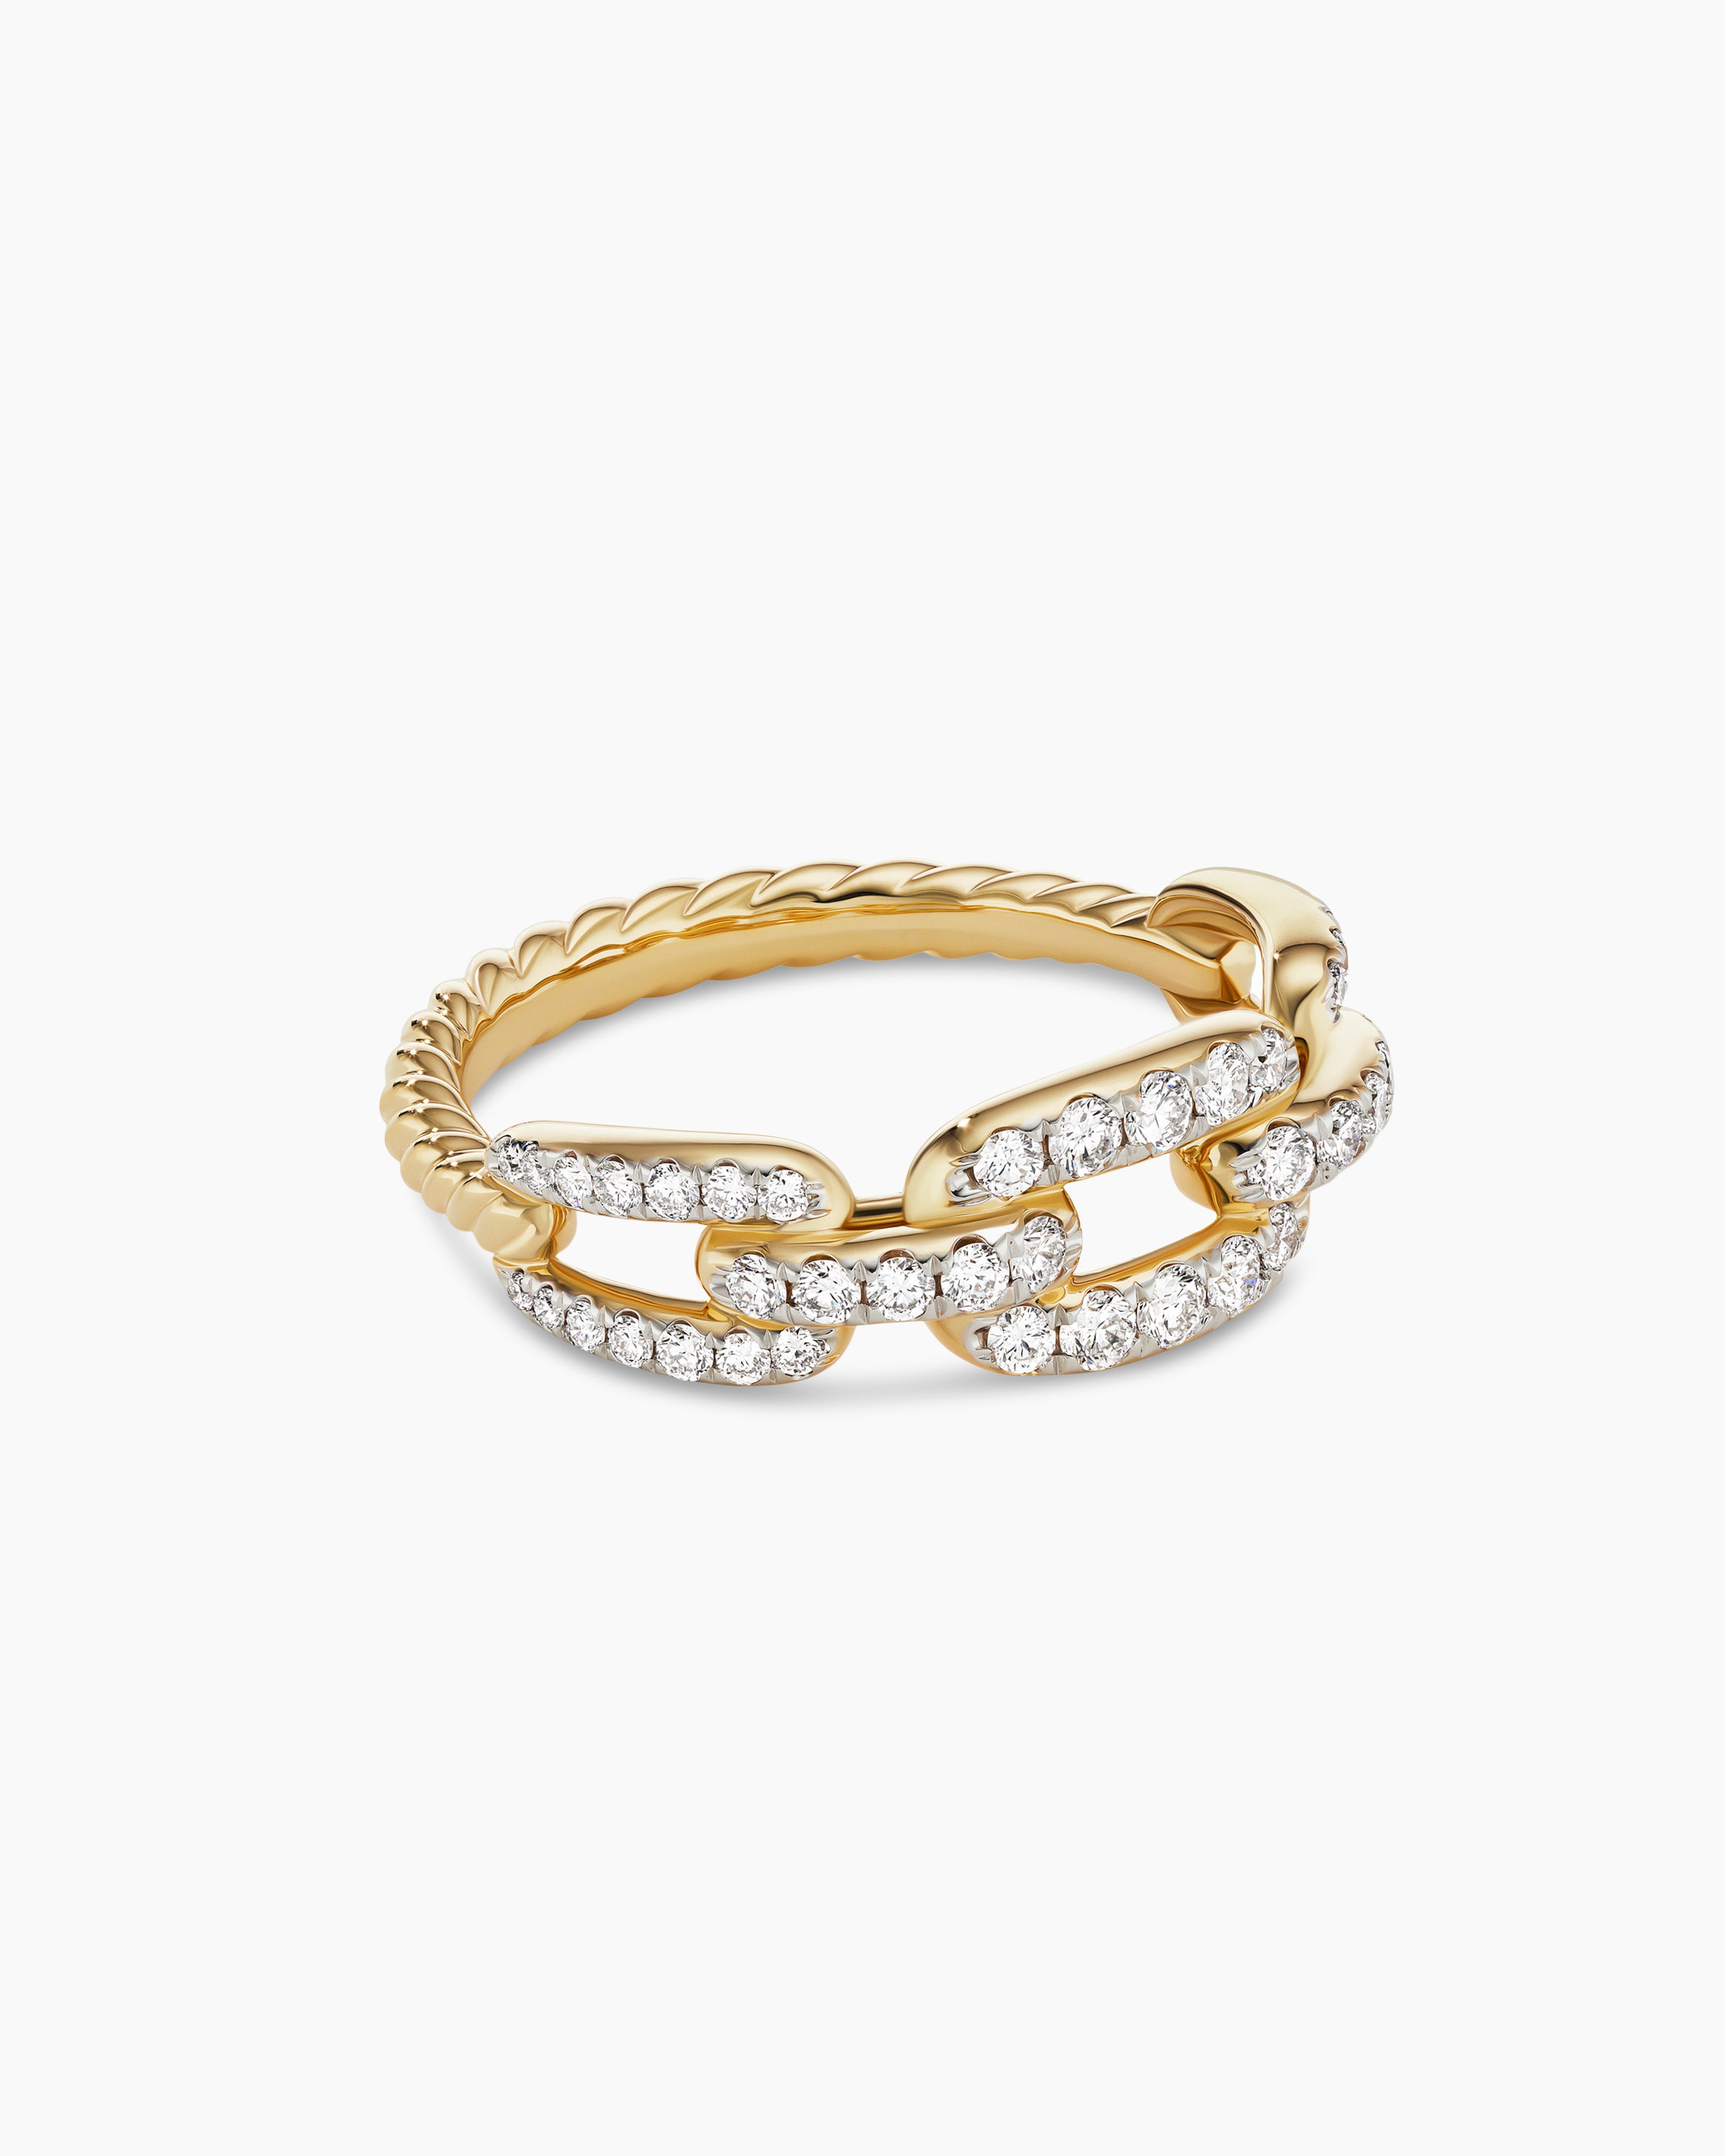 Stax Chain Link Ring in 18K Yellow Gold with Diamonds, 7mm